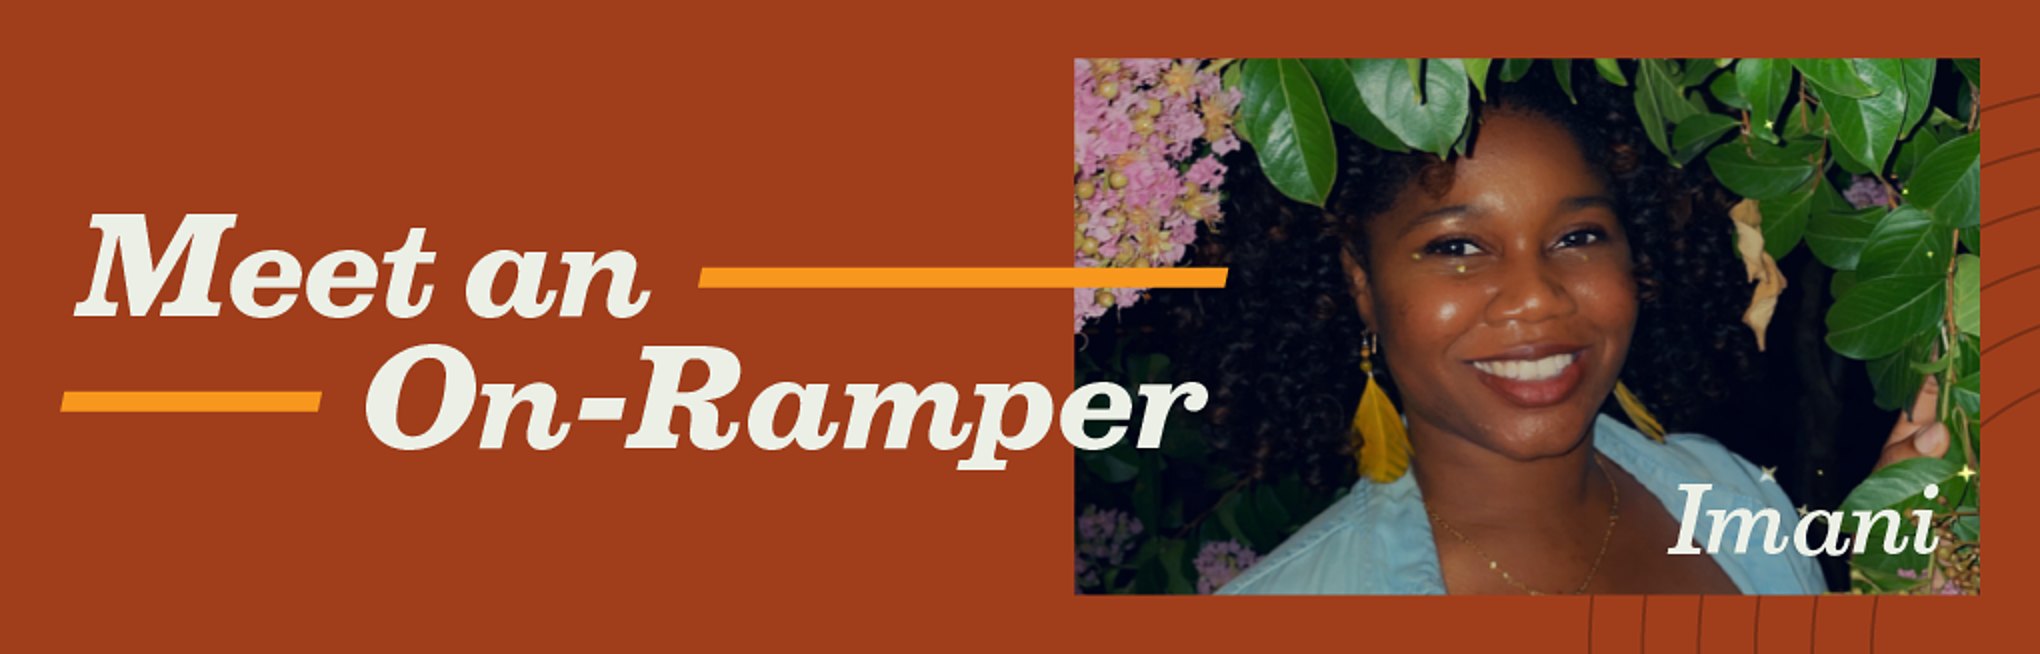 On-Ramper's photos with the "Finding the right COO" caption